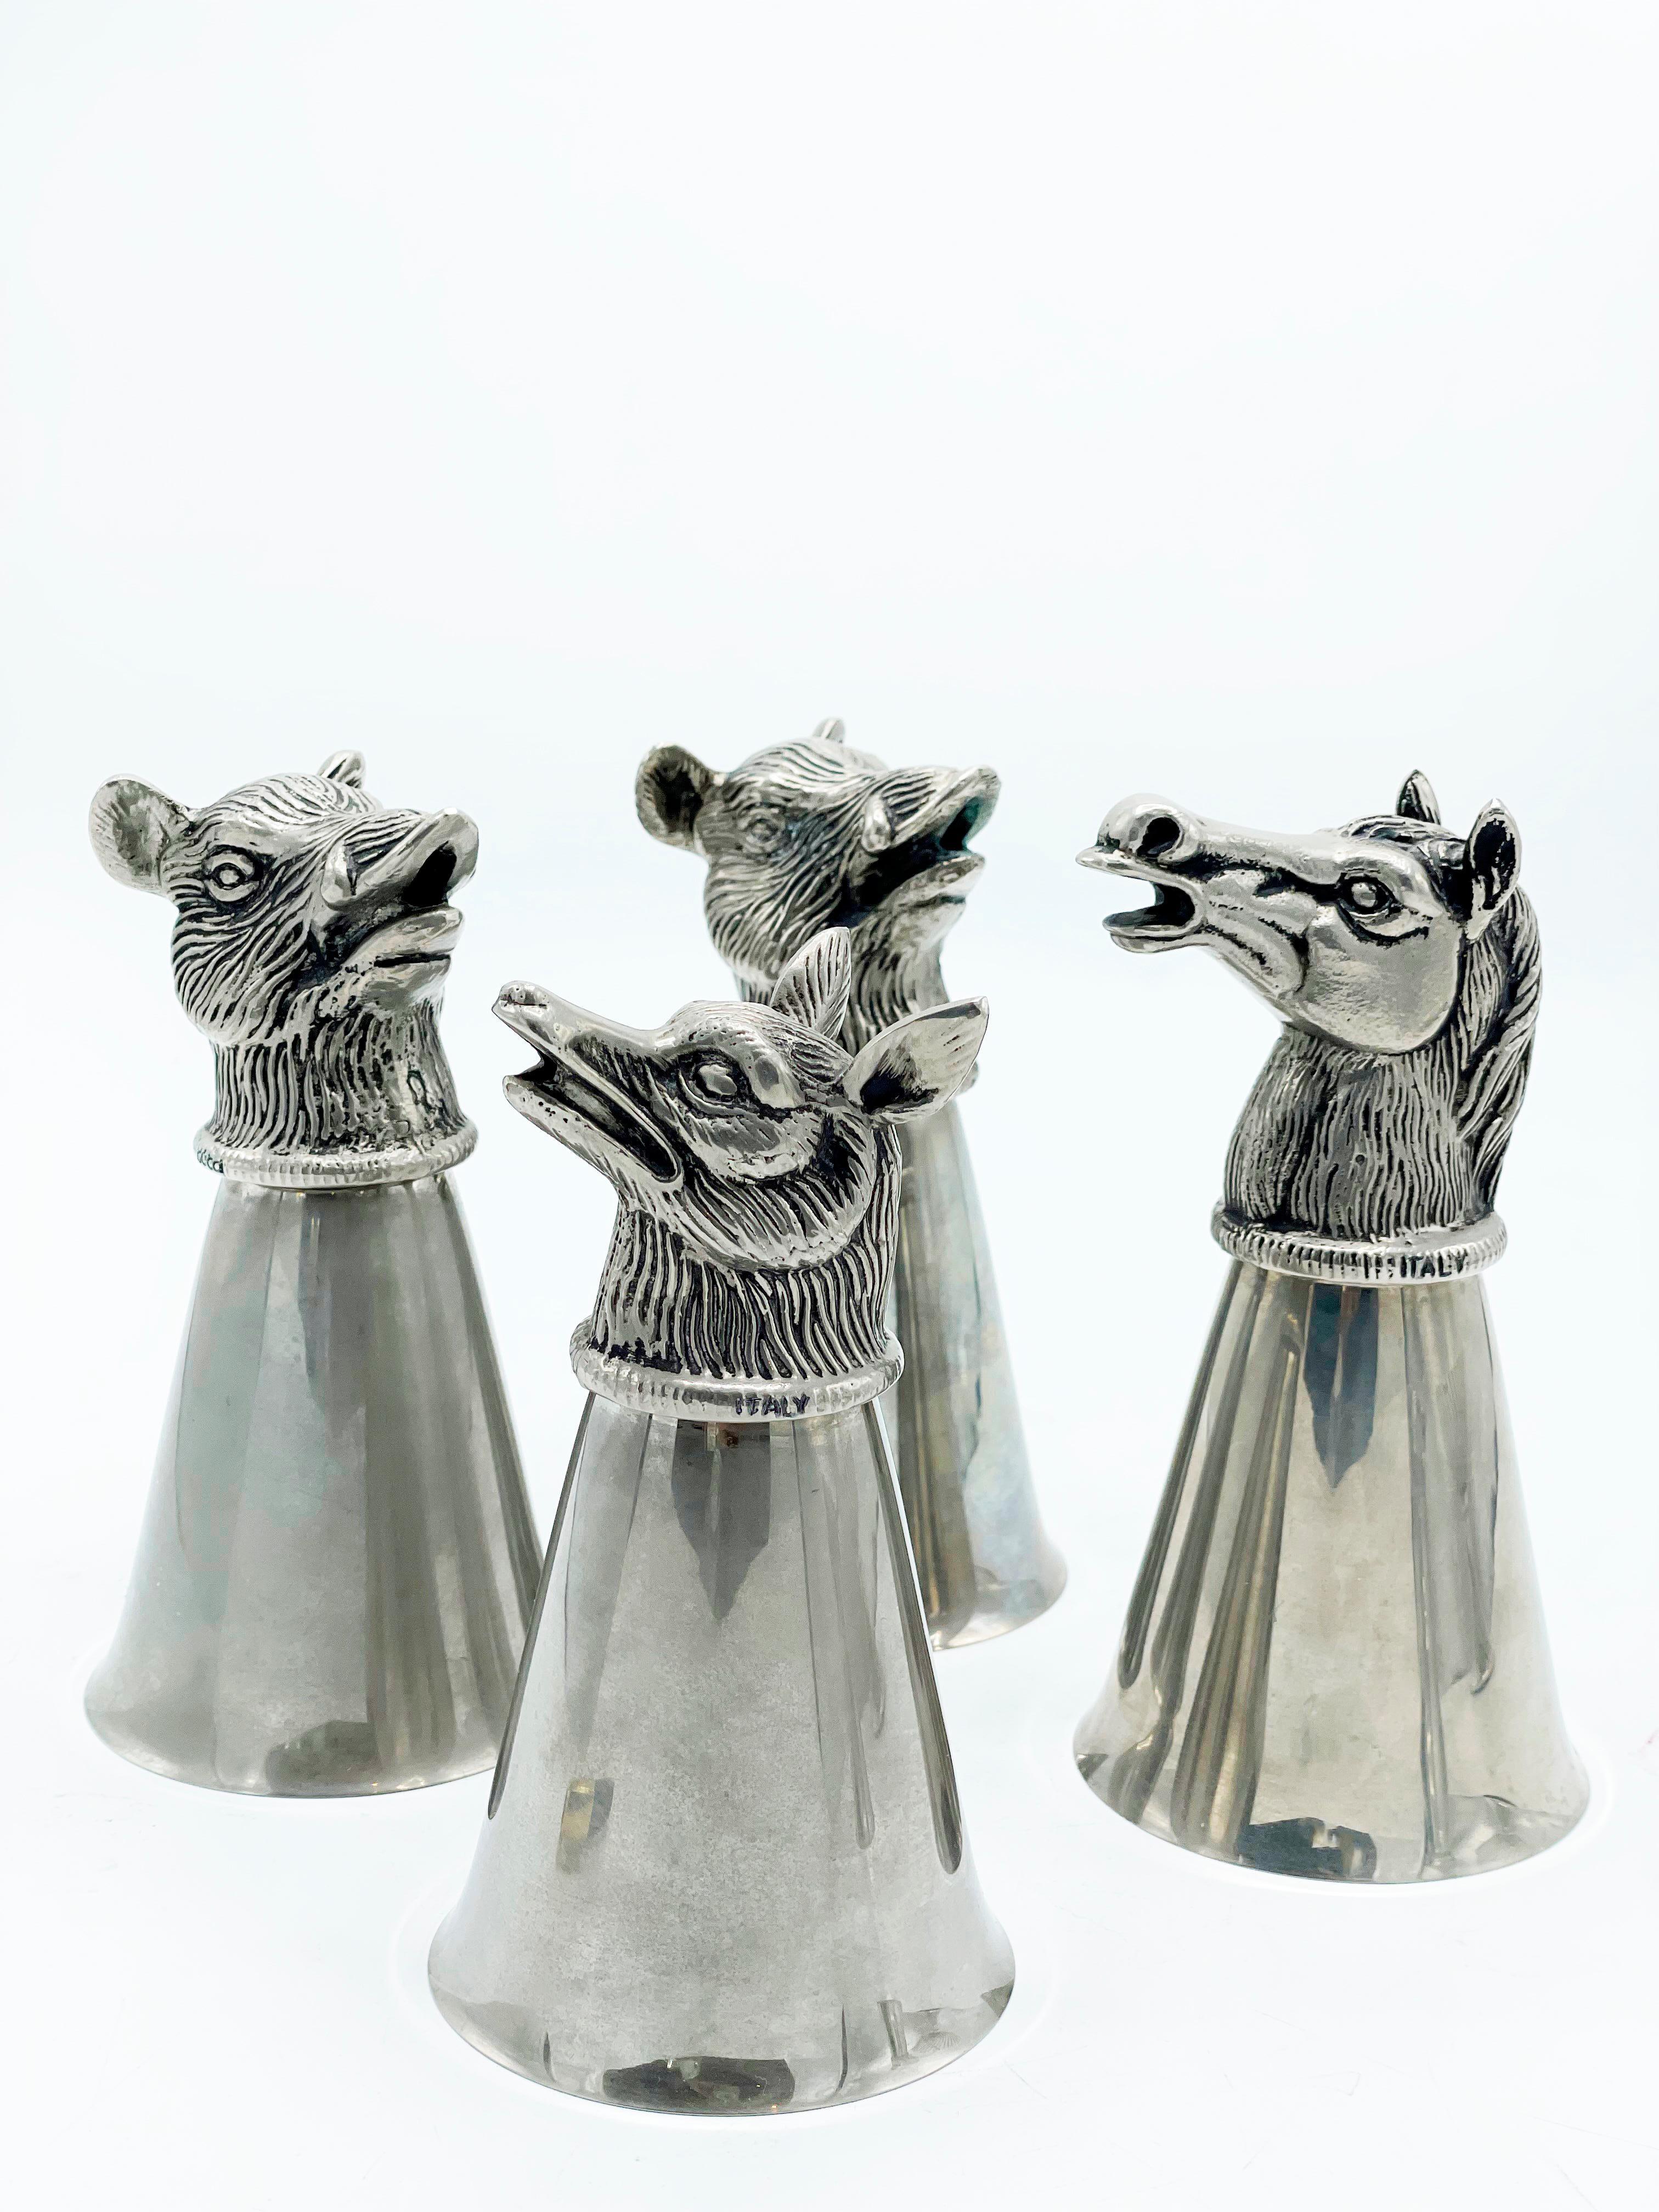 Set of four silver plated animal heads animals, goblets, cups, made in Italy.
signed: Gucci, ITALY.
The set includes 2 wild boars, 1 horse and 1 fox.
The fox's cup is smaller.


Creator: Gucci
Dimensions:
Height: 15.5 cm
Diameter: 8 cm

Height: 14